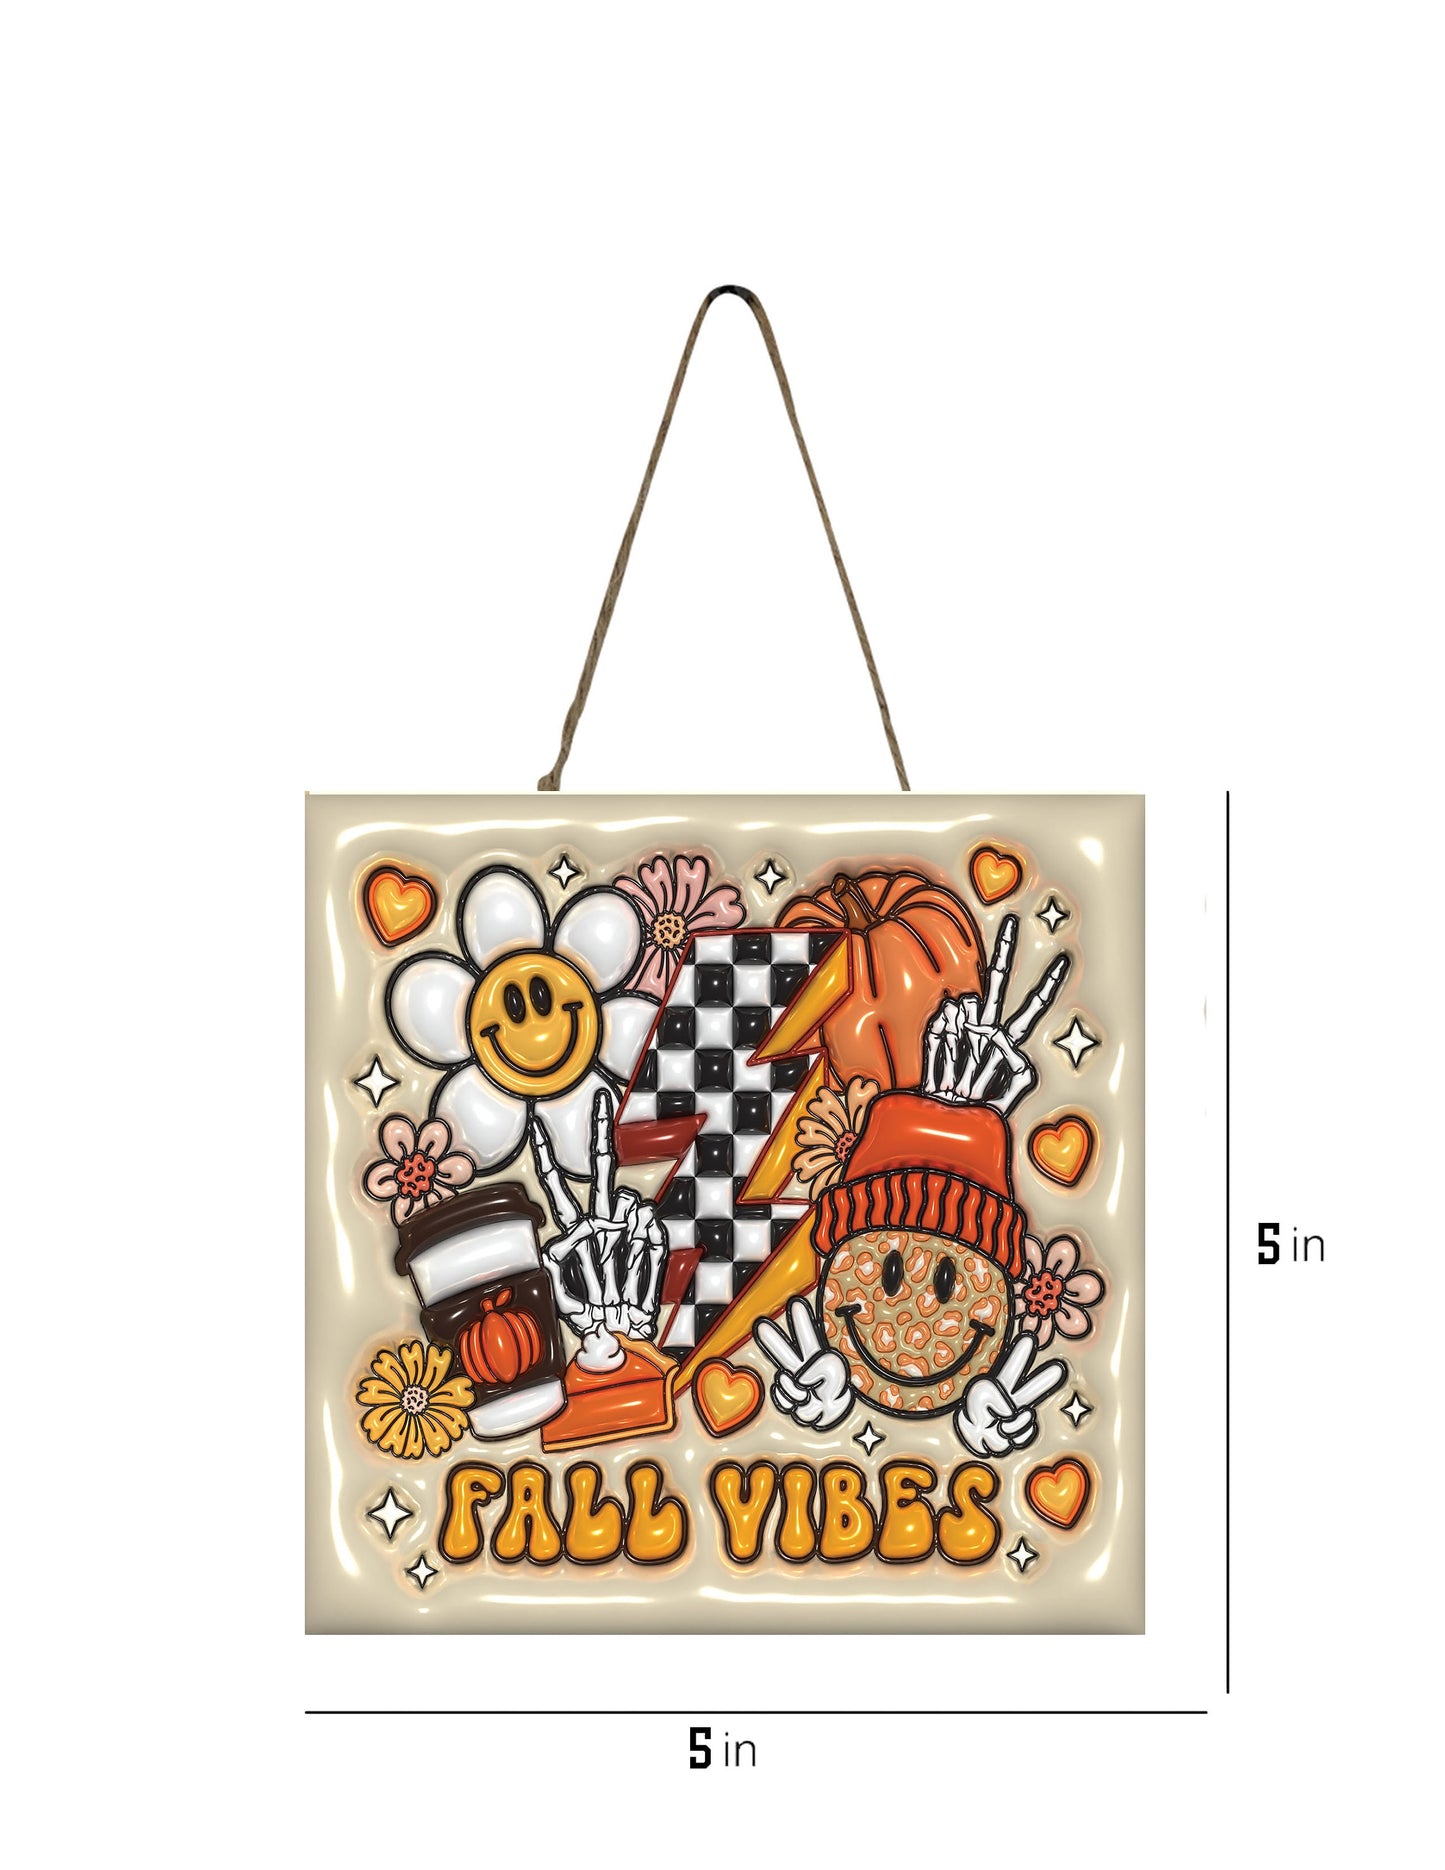 New Releases Fall Vibes Hanging Wall Mini Sign Wood Home Decor, Door Hanger, Wreath Sign